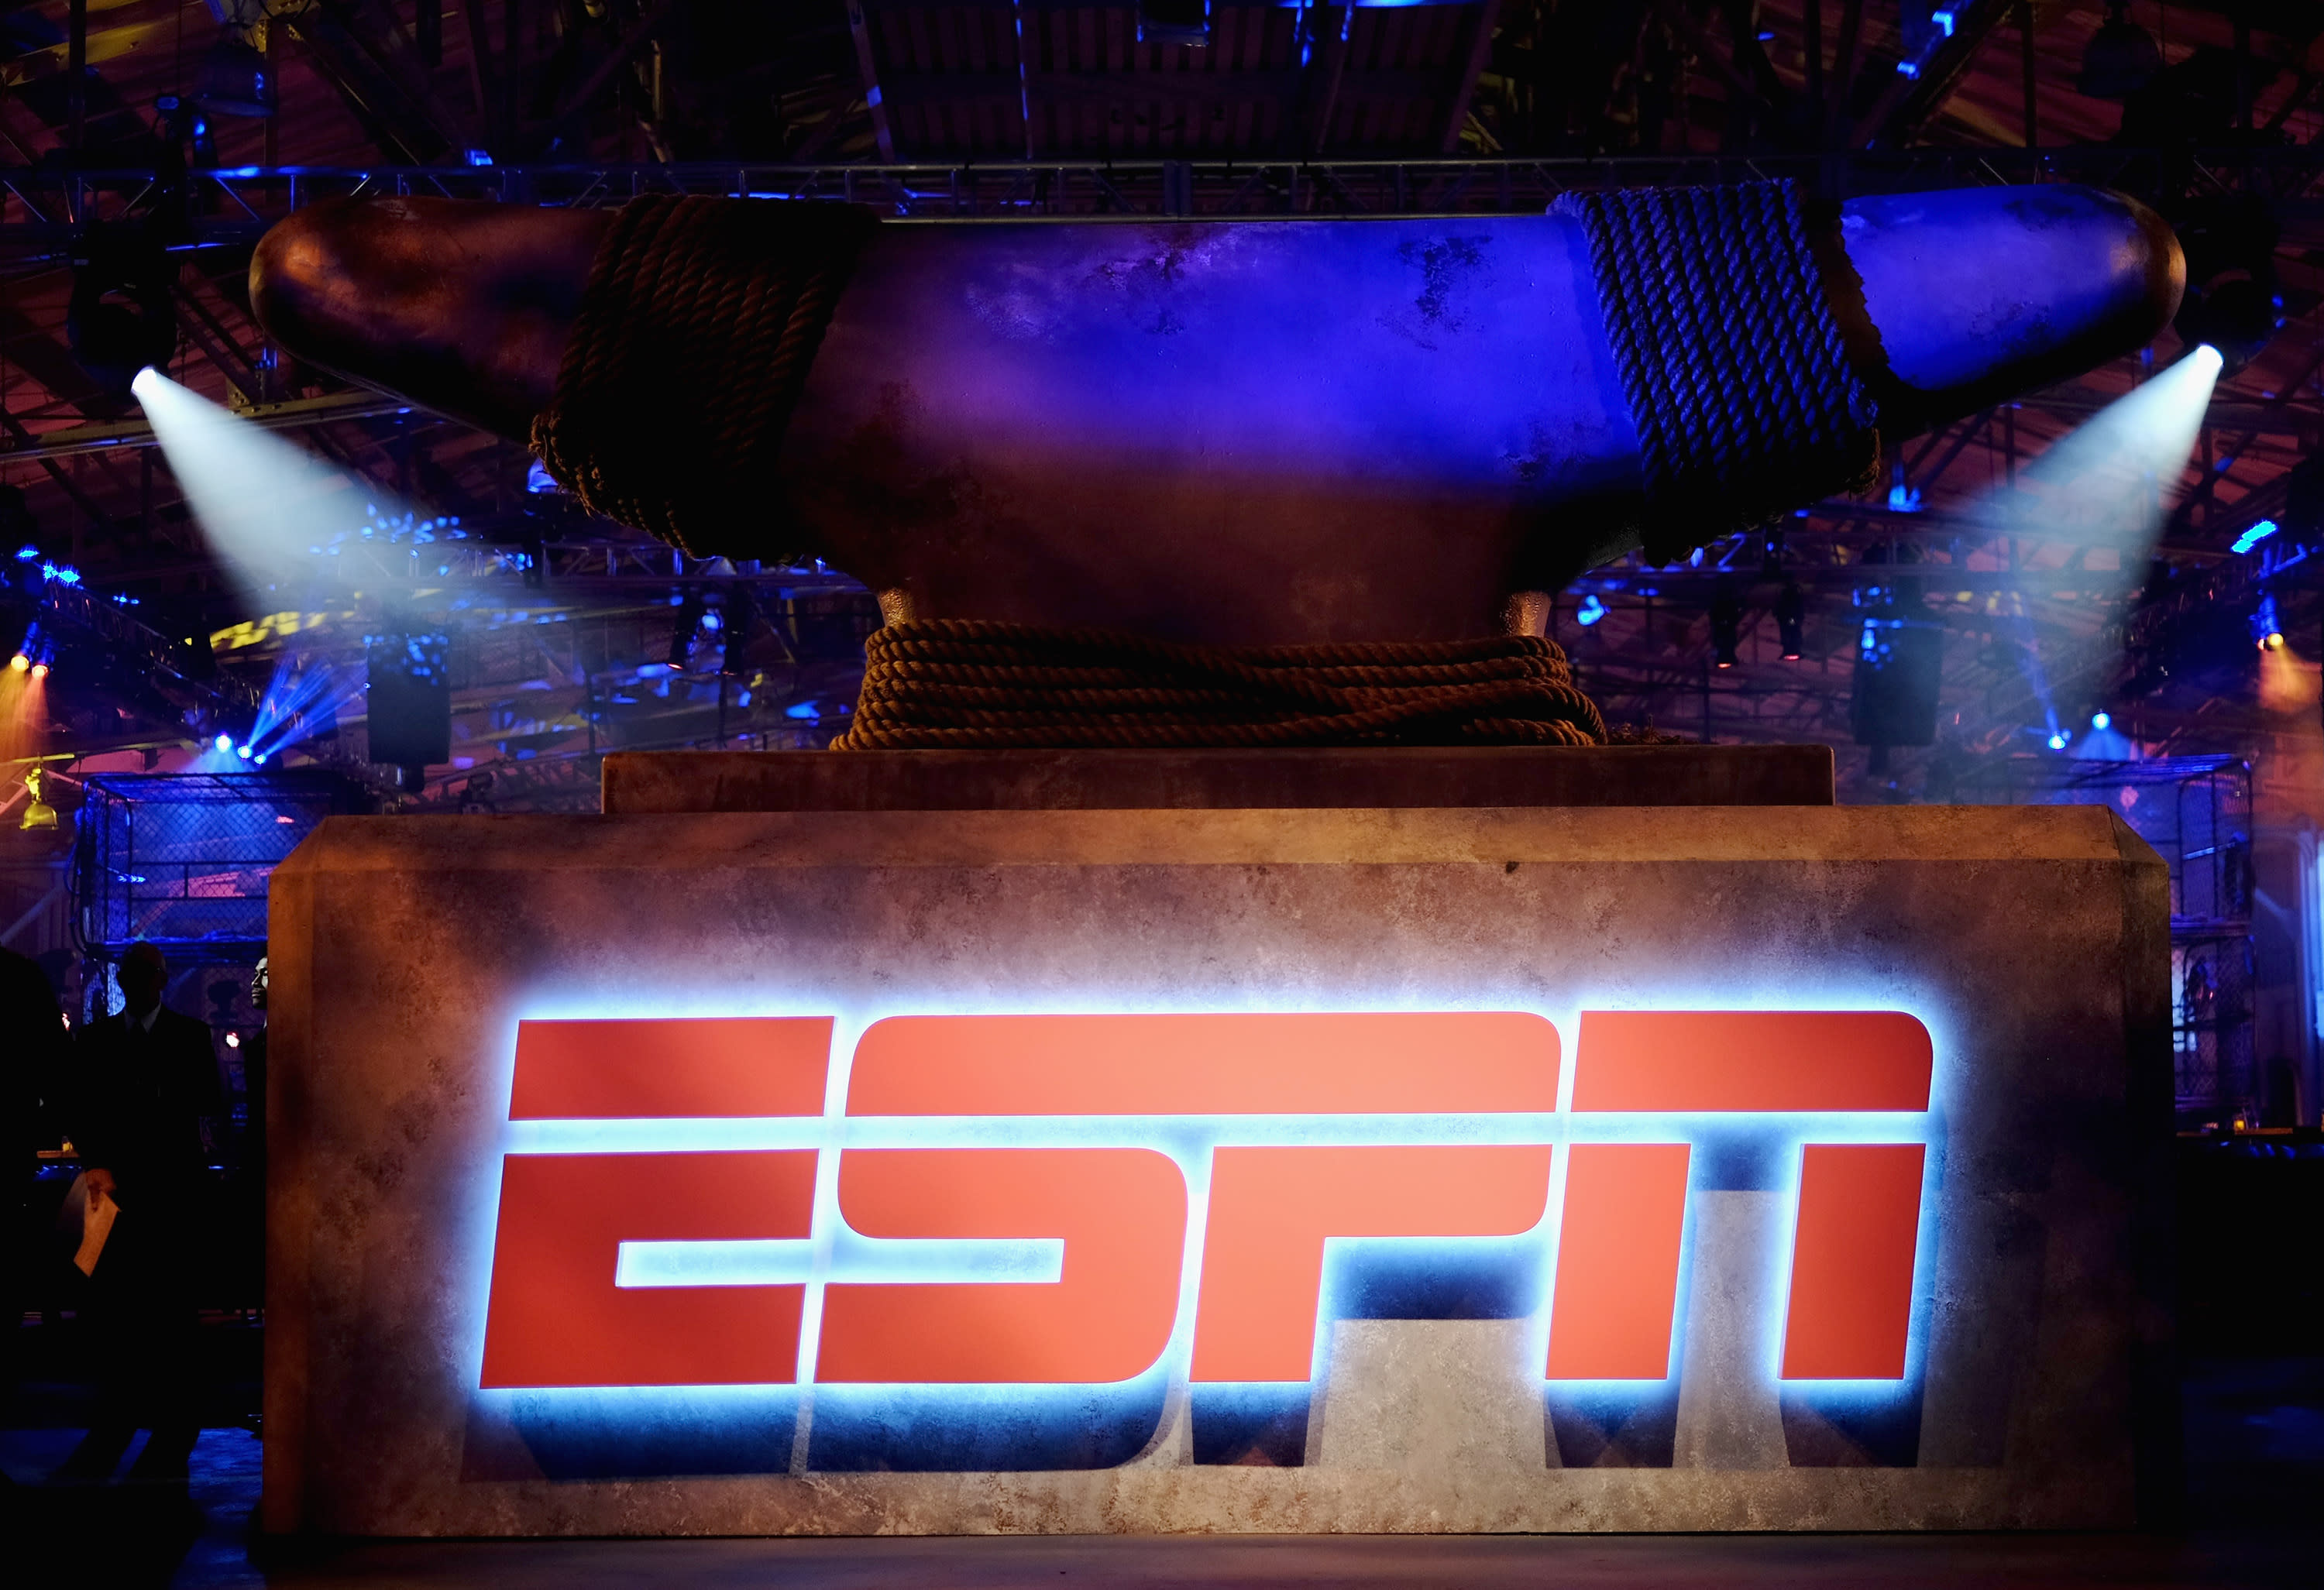 ESPN Plus entices fans of college sports and 30 For 30